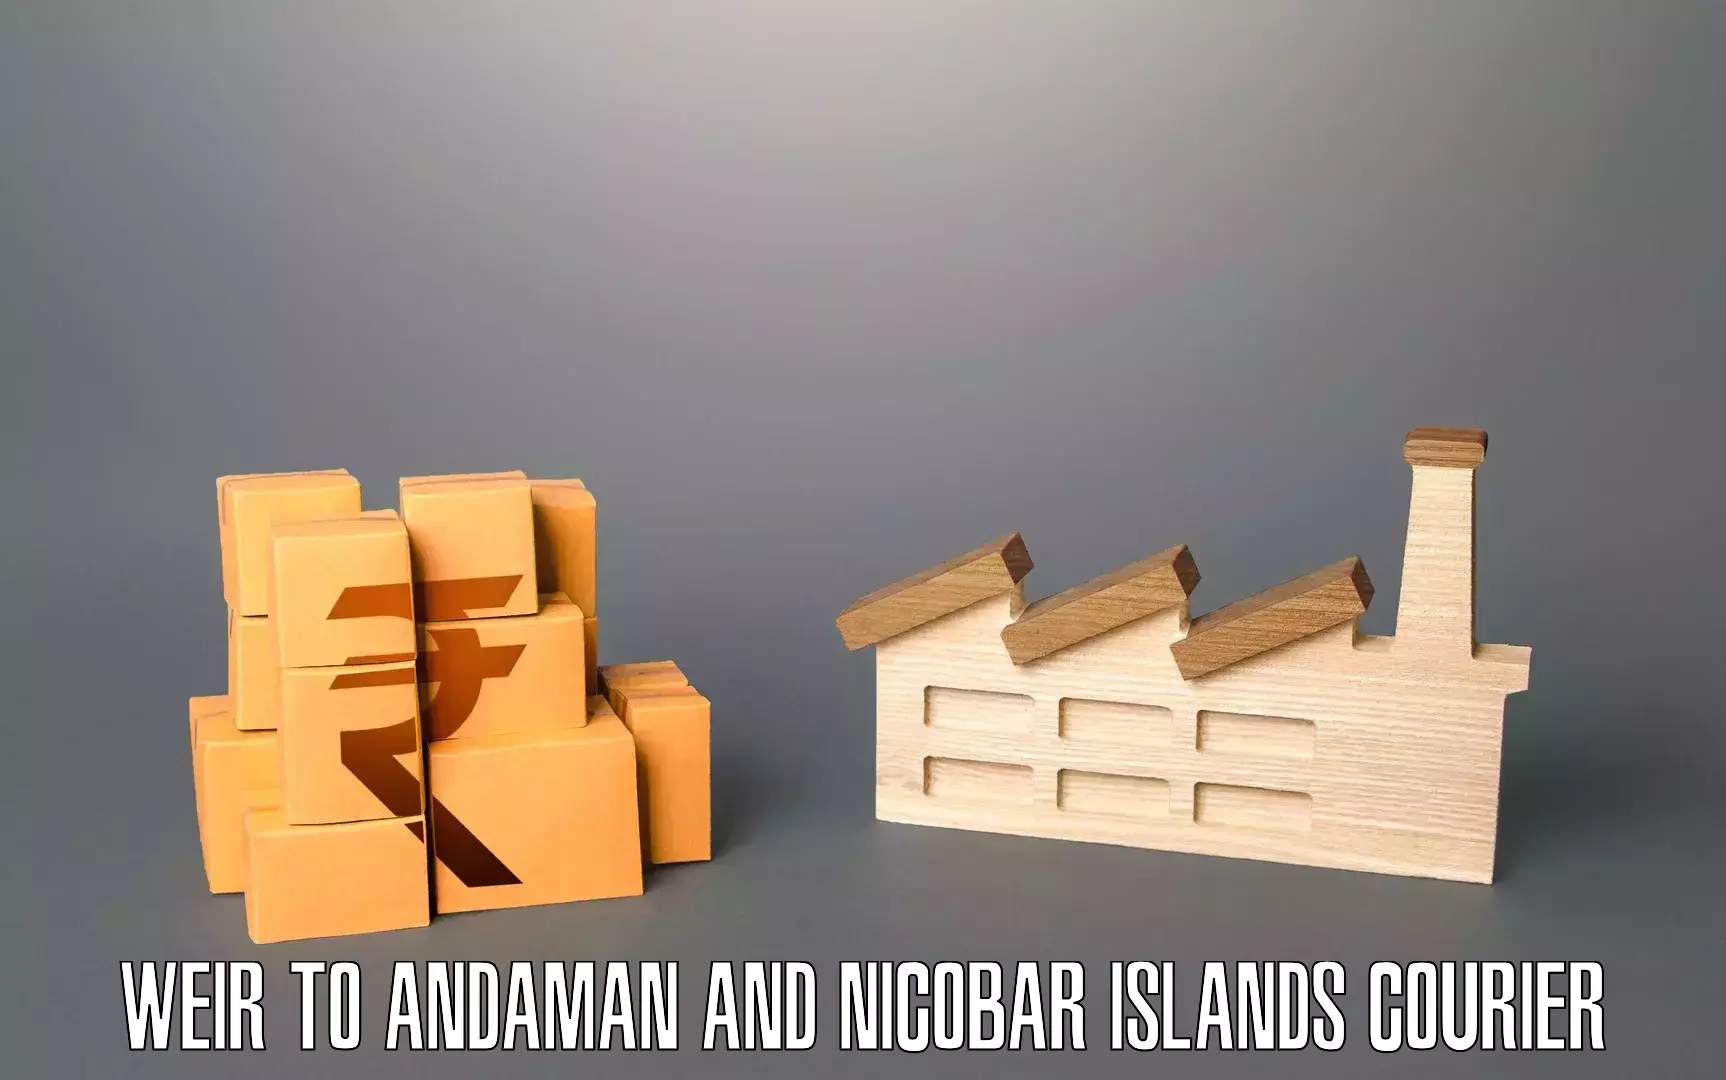 Household moving experts Weir to Andaman and Nicobar Islands